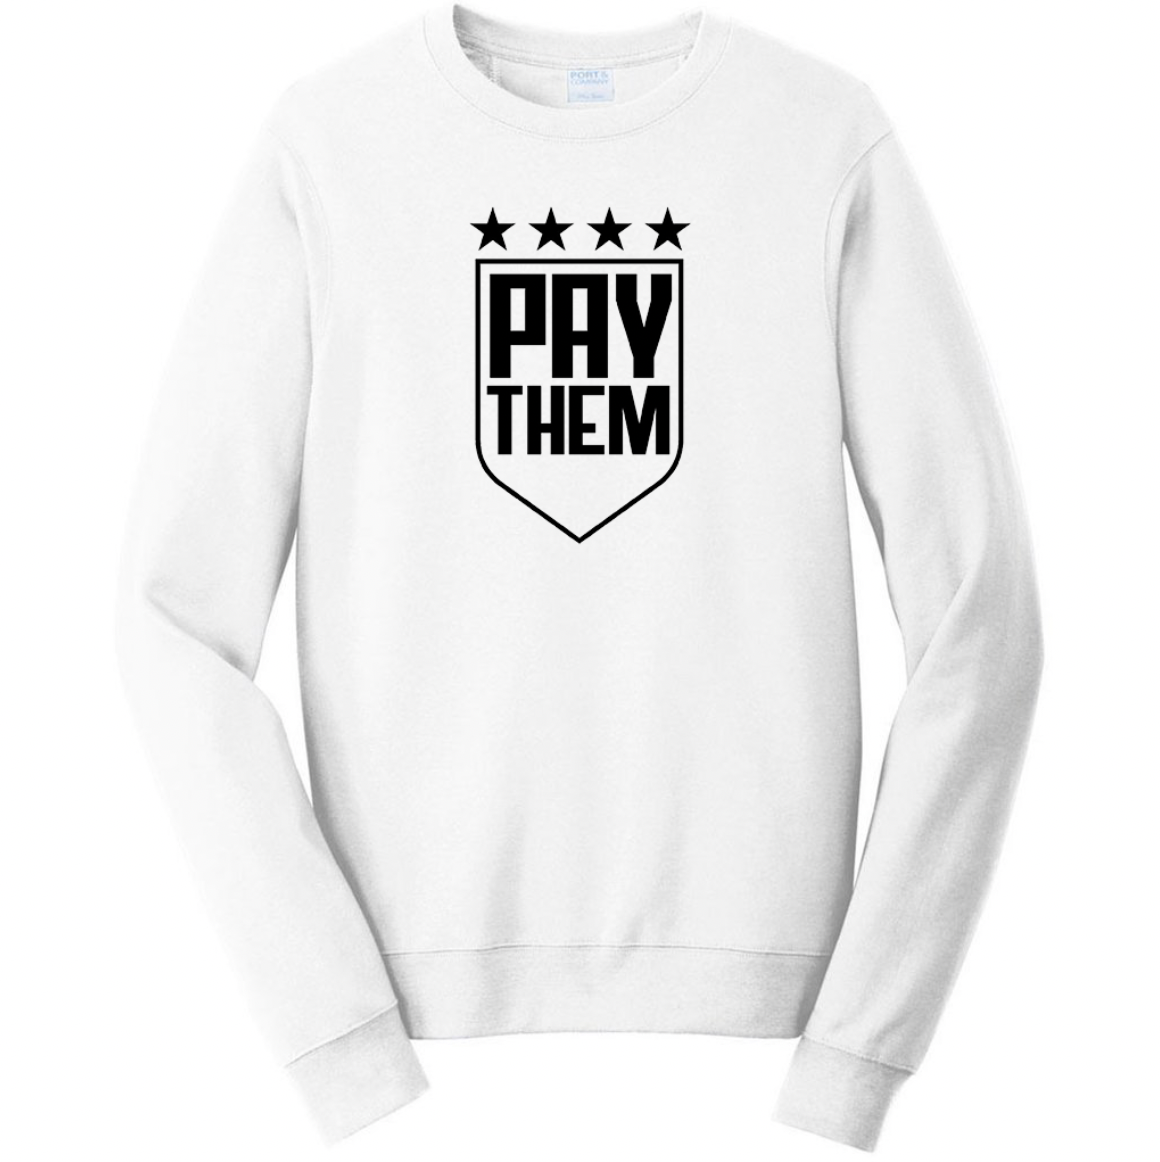 white crewneck sweatshirt with pay them imprint in black by soccergrlprobs